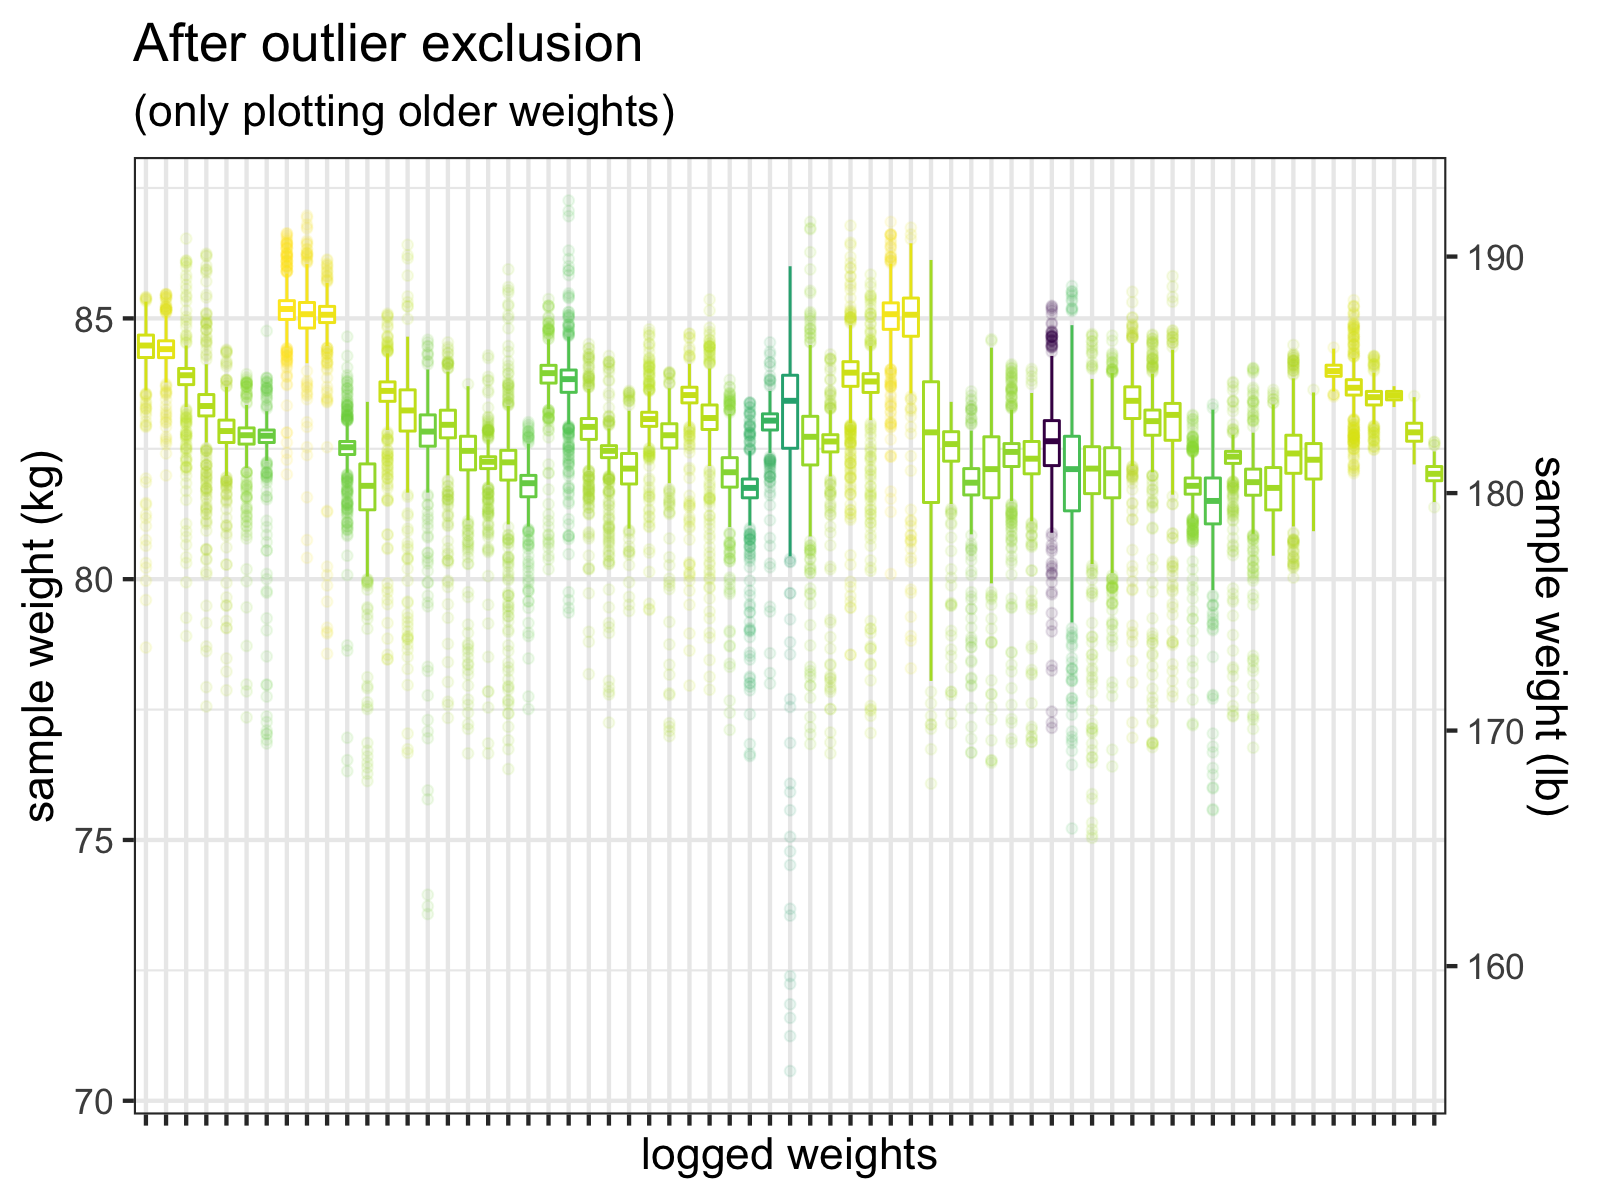 After I exclude samples <= 60 kg, and <em>then</em> exclude outliers > +-3 SD, the outliers are much less extreme. We do see a few values < 75 kg, but these <em>could</em> be real weights. (Wishful thinking, perhaps.)